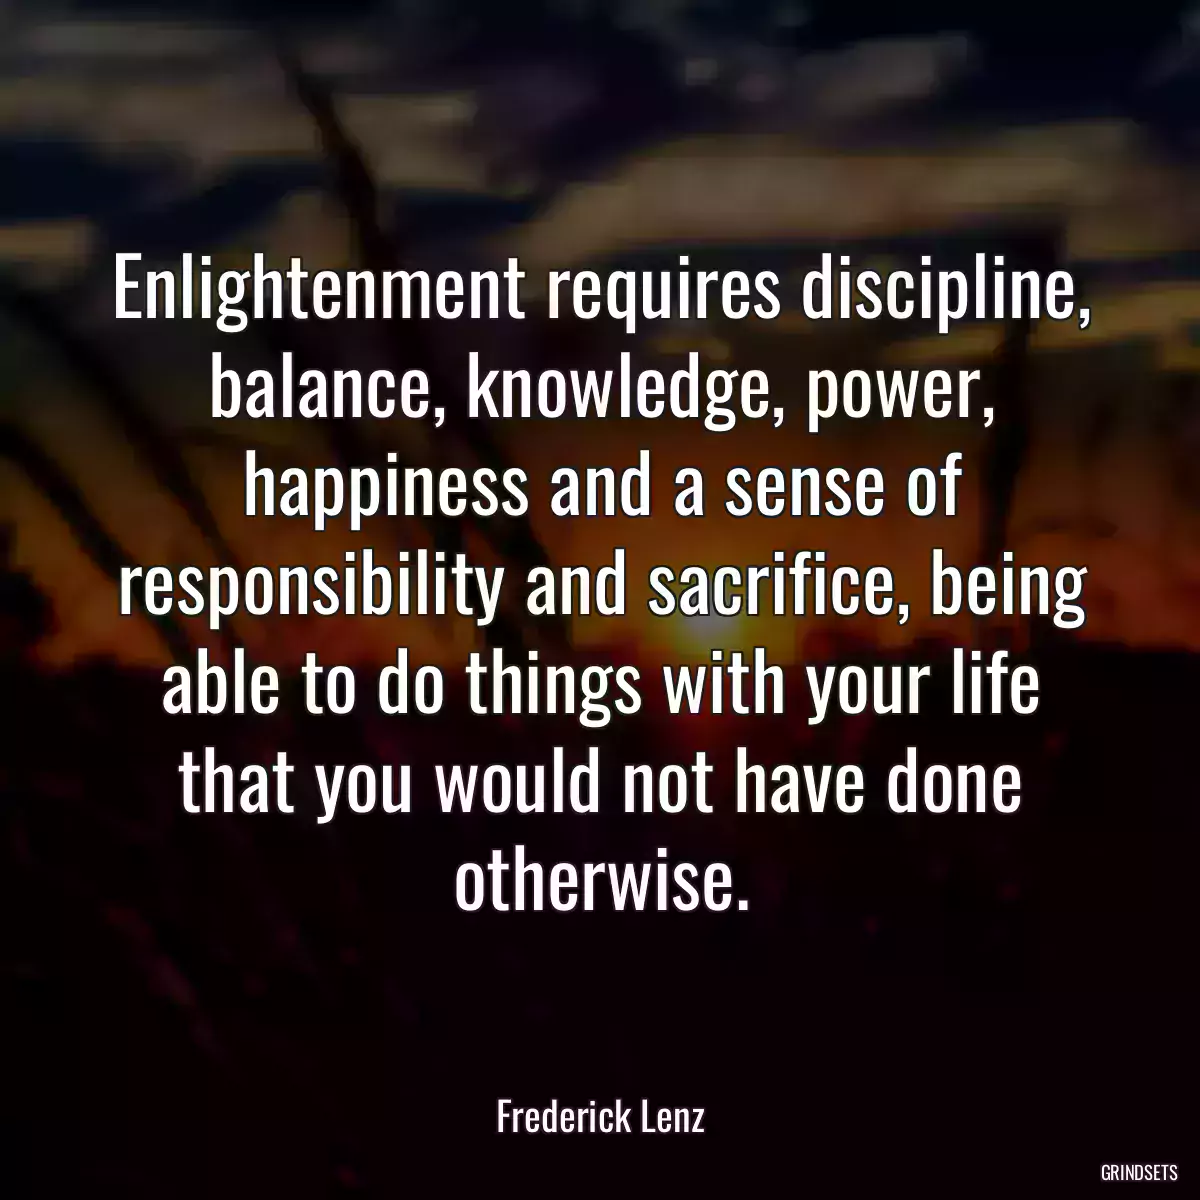 Enlightenment requires discipline, balance, knowledge, power, happiness and a sense of responsibility and sacrifice, being able to do things with your life that you would not have done otherwise.